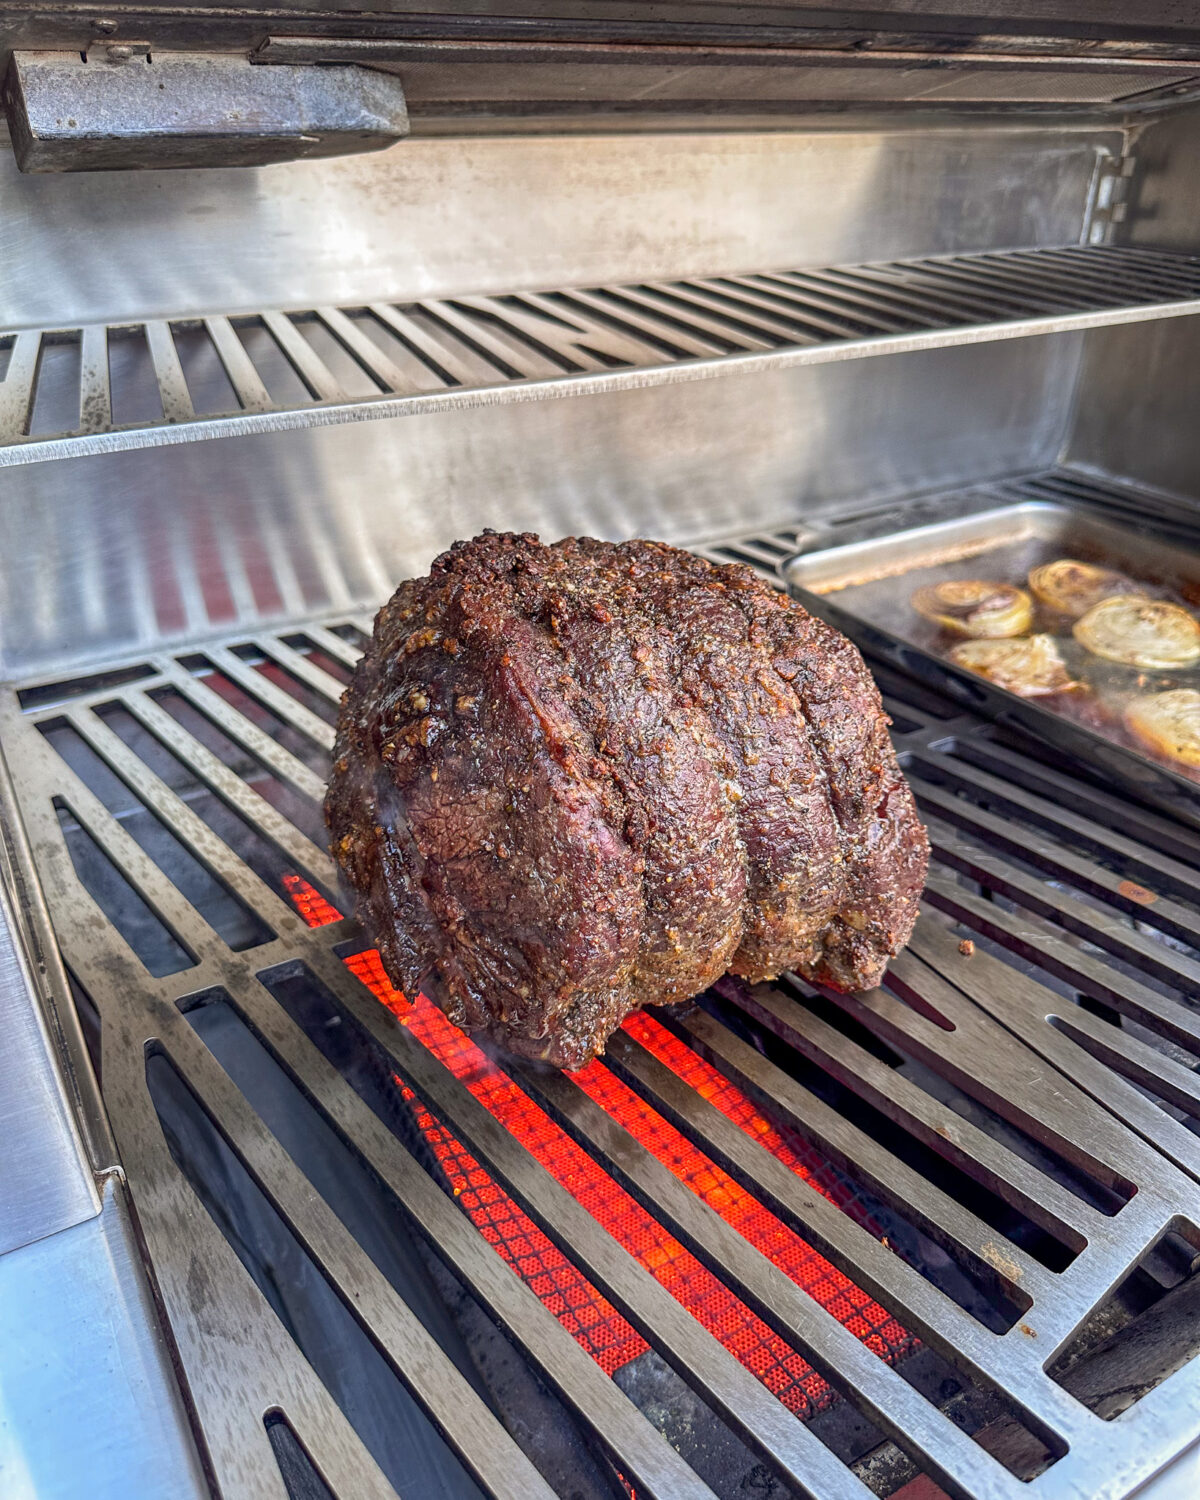 Beef is placed on the sear zone of the grill.